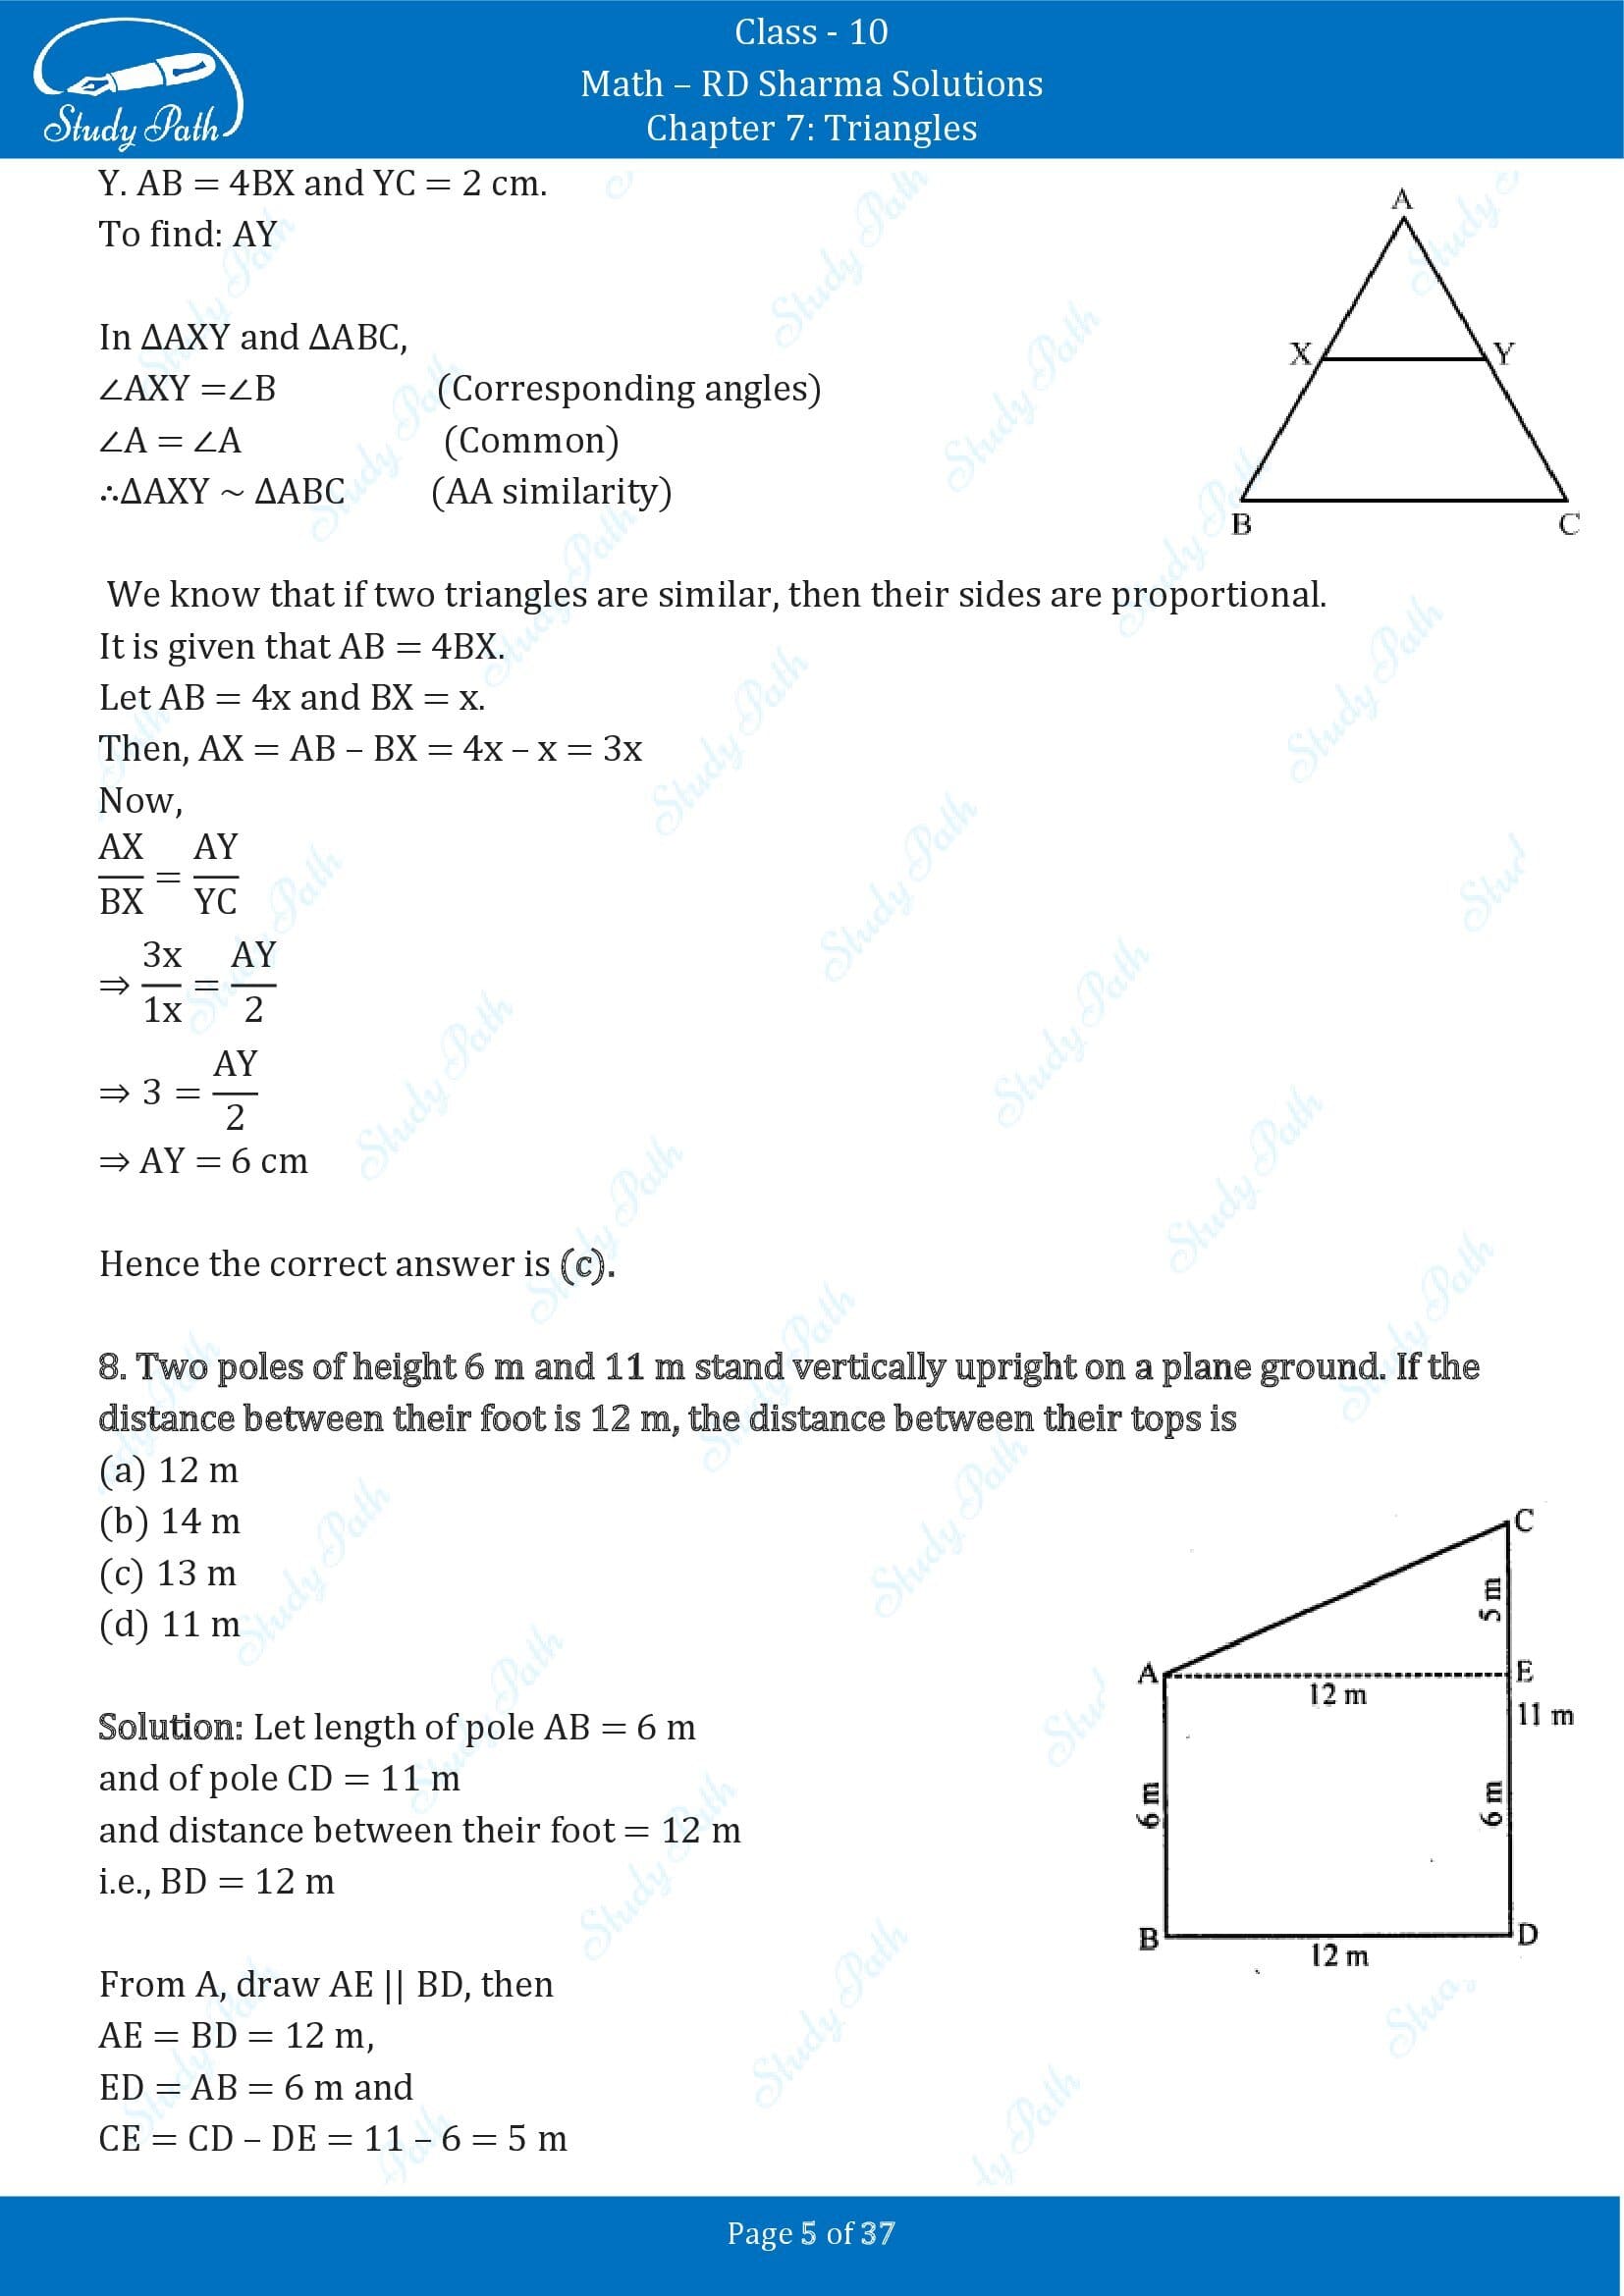 RD Sharma Solutions Class 10 Chapter 7 Triangles Multiple Choice Question MCQs 00005